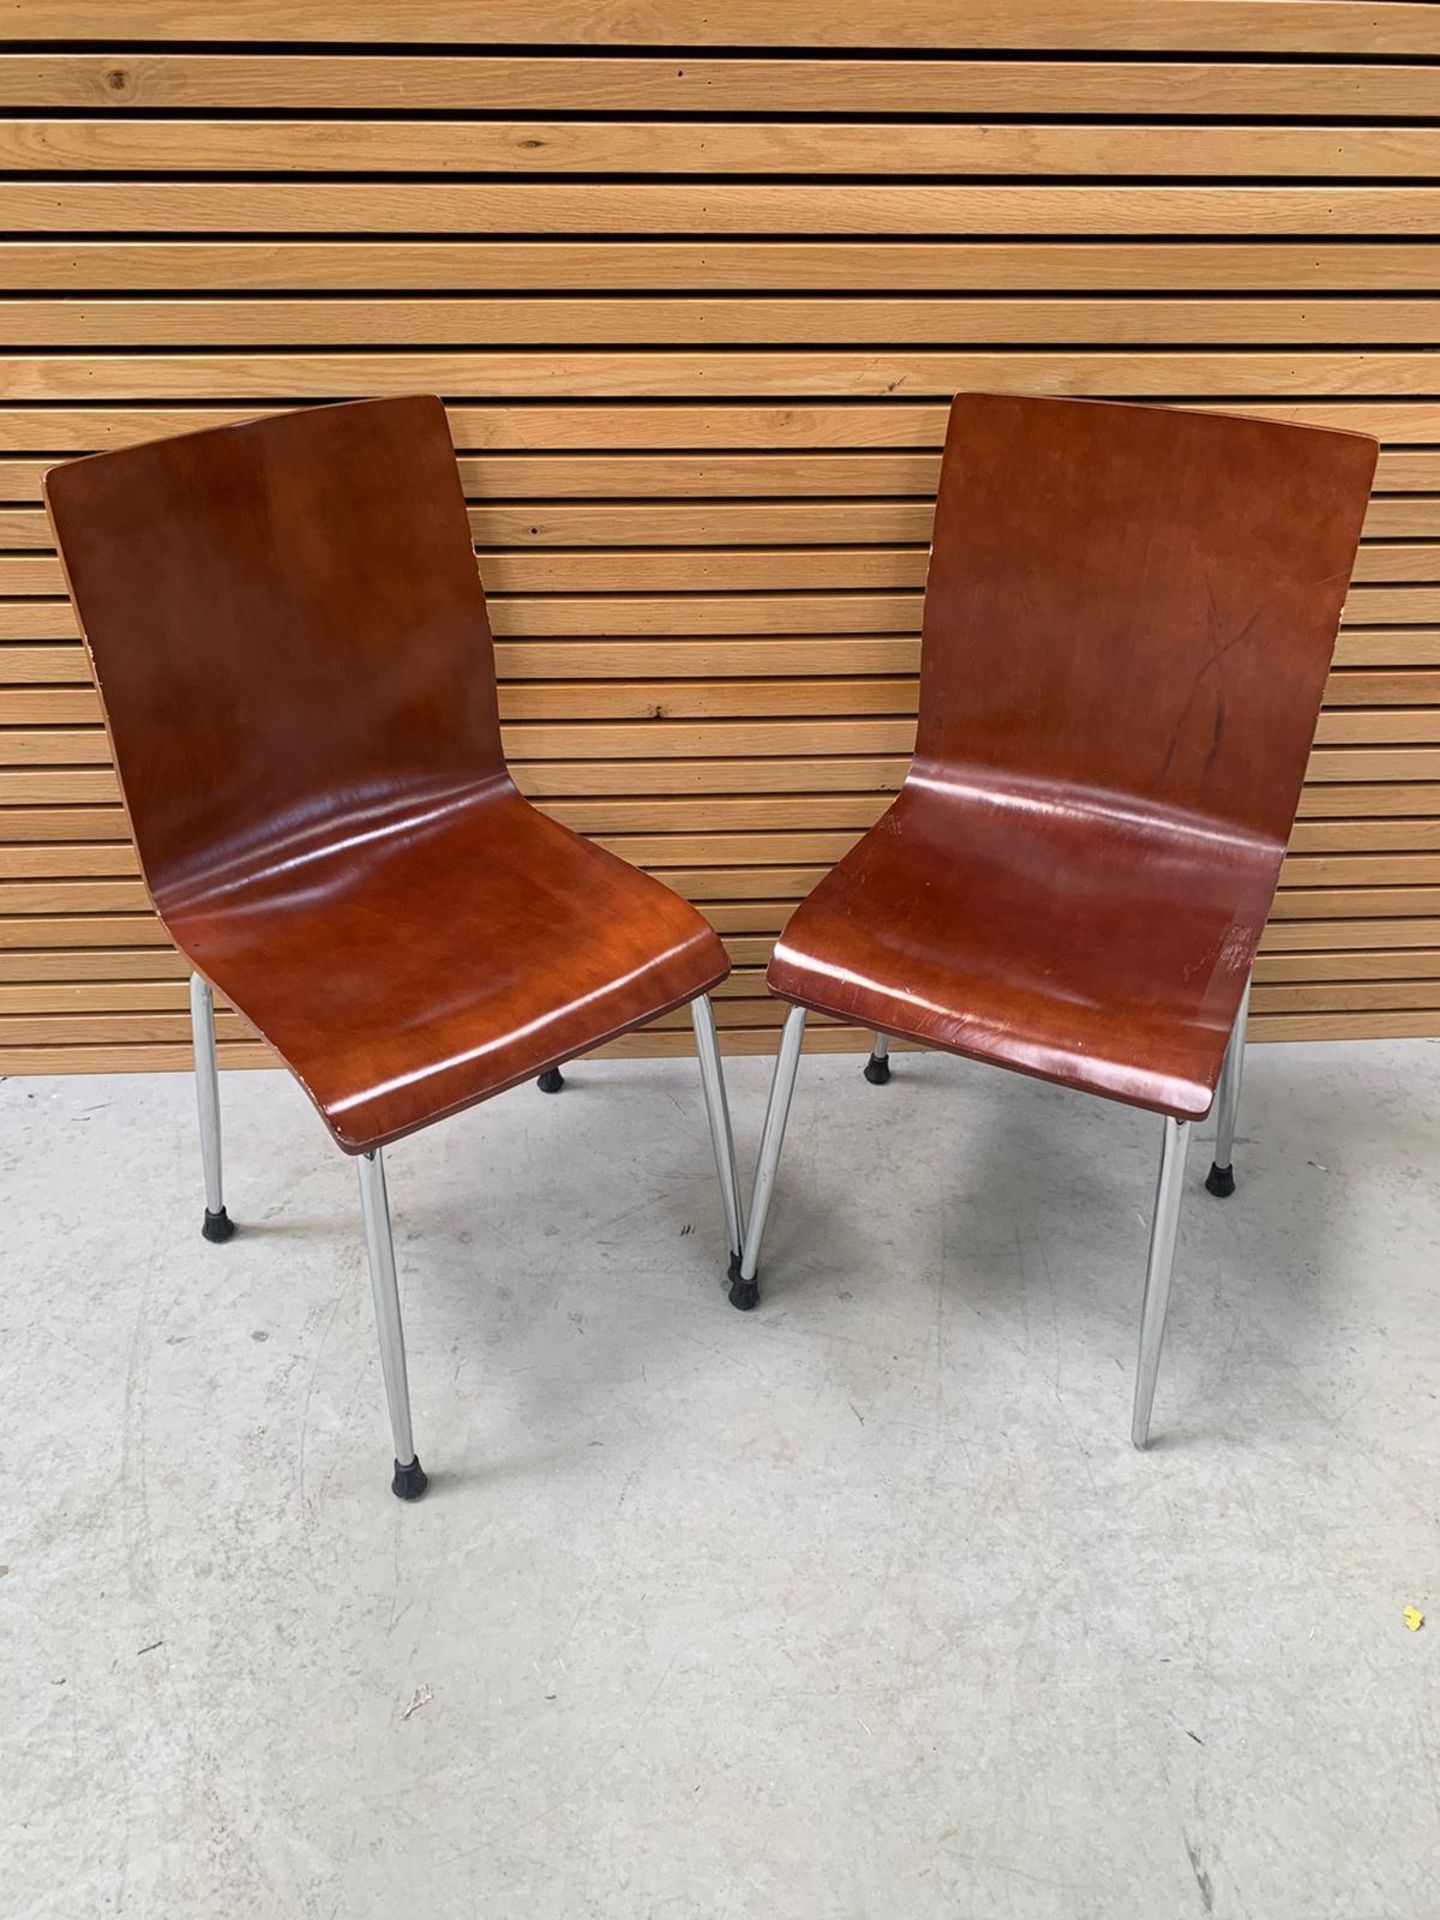 Dark Woodgrain Effect Commercial Grade Chairs Set - Image 2 of 3